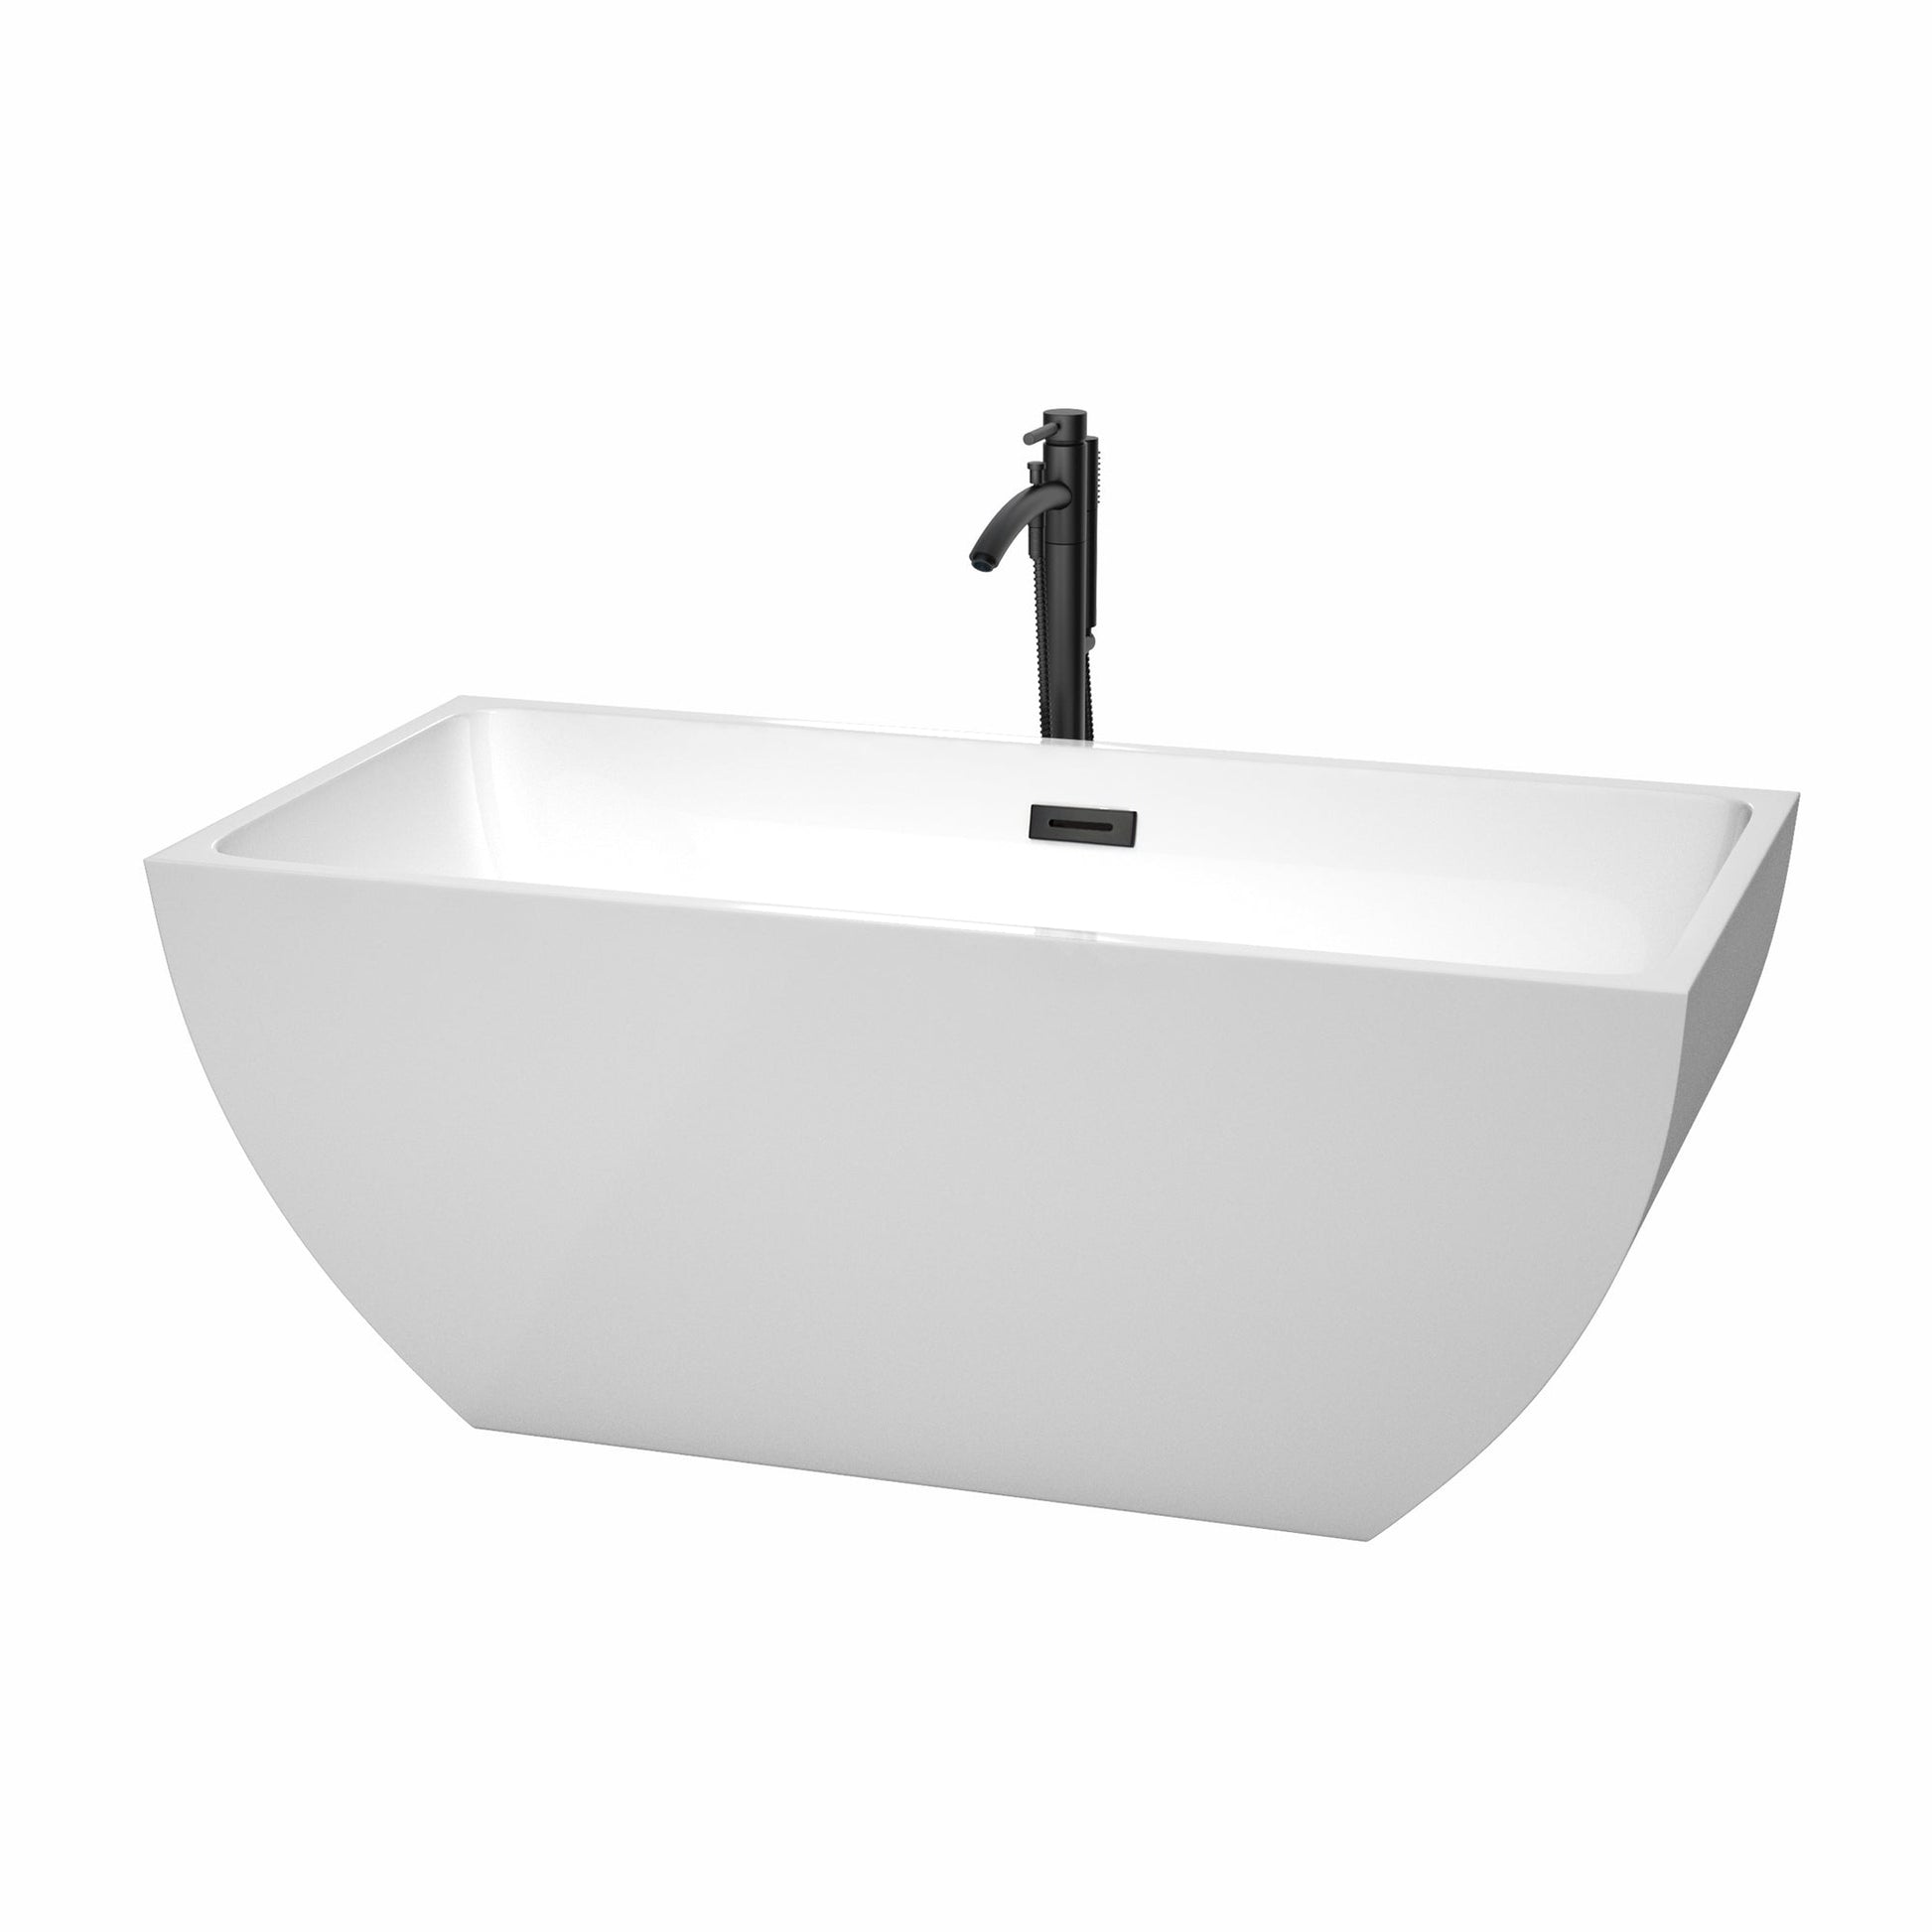 Wyndham Collection Rachel 59" Freestanding Bathtub in White With Floor Mounted Faucet, Drain and Overflow Trim in Matte Black